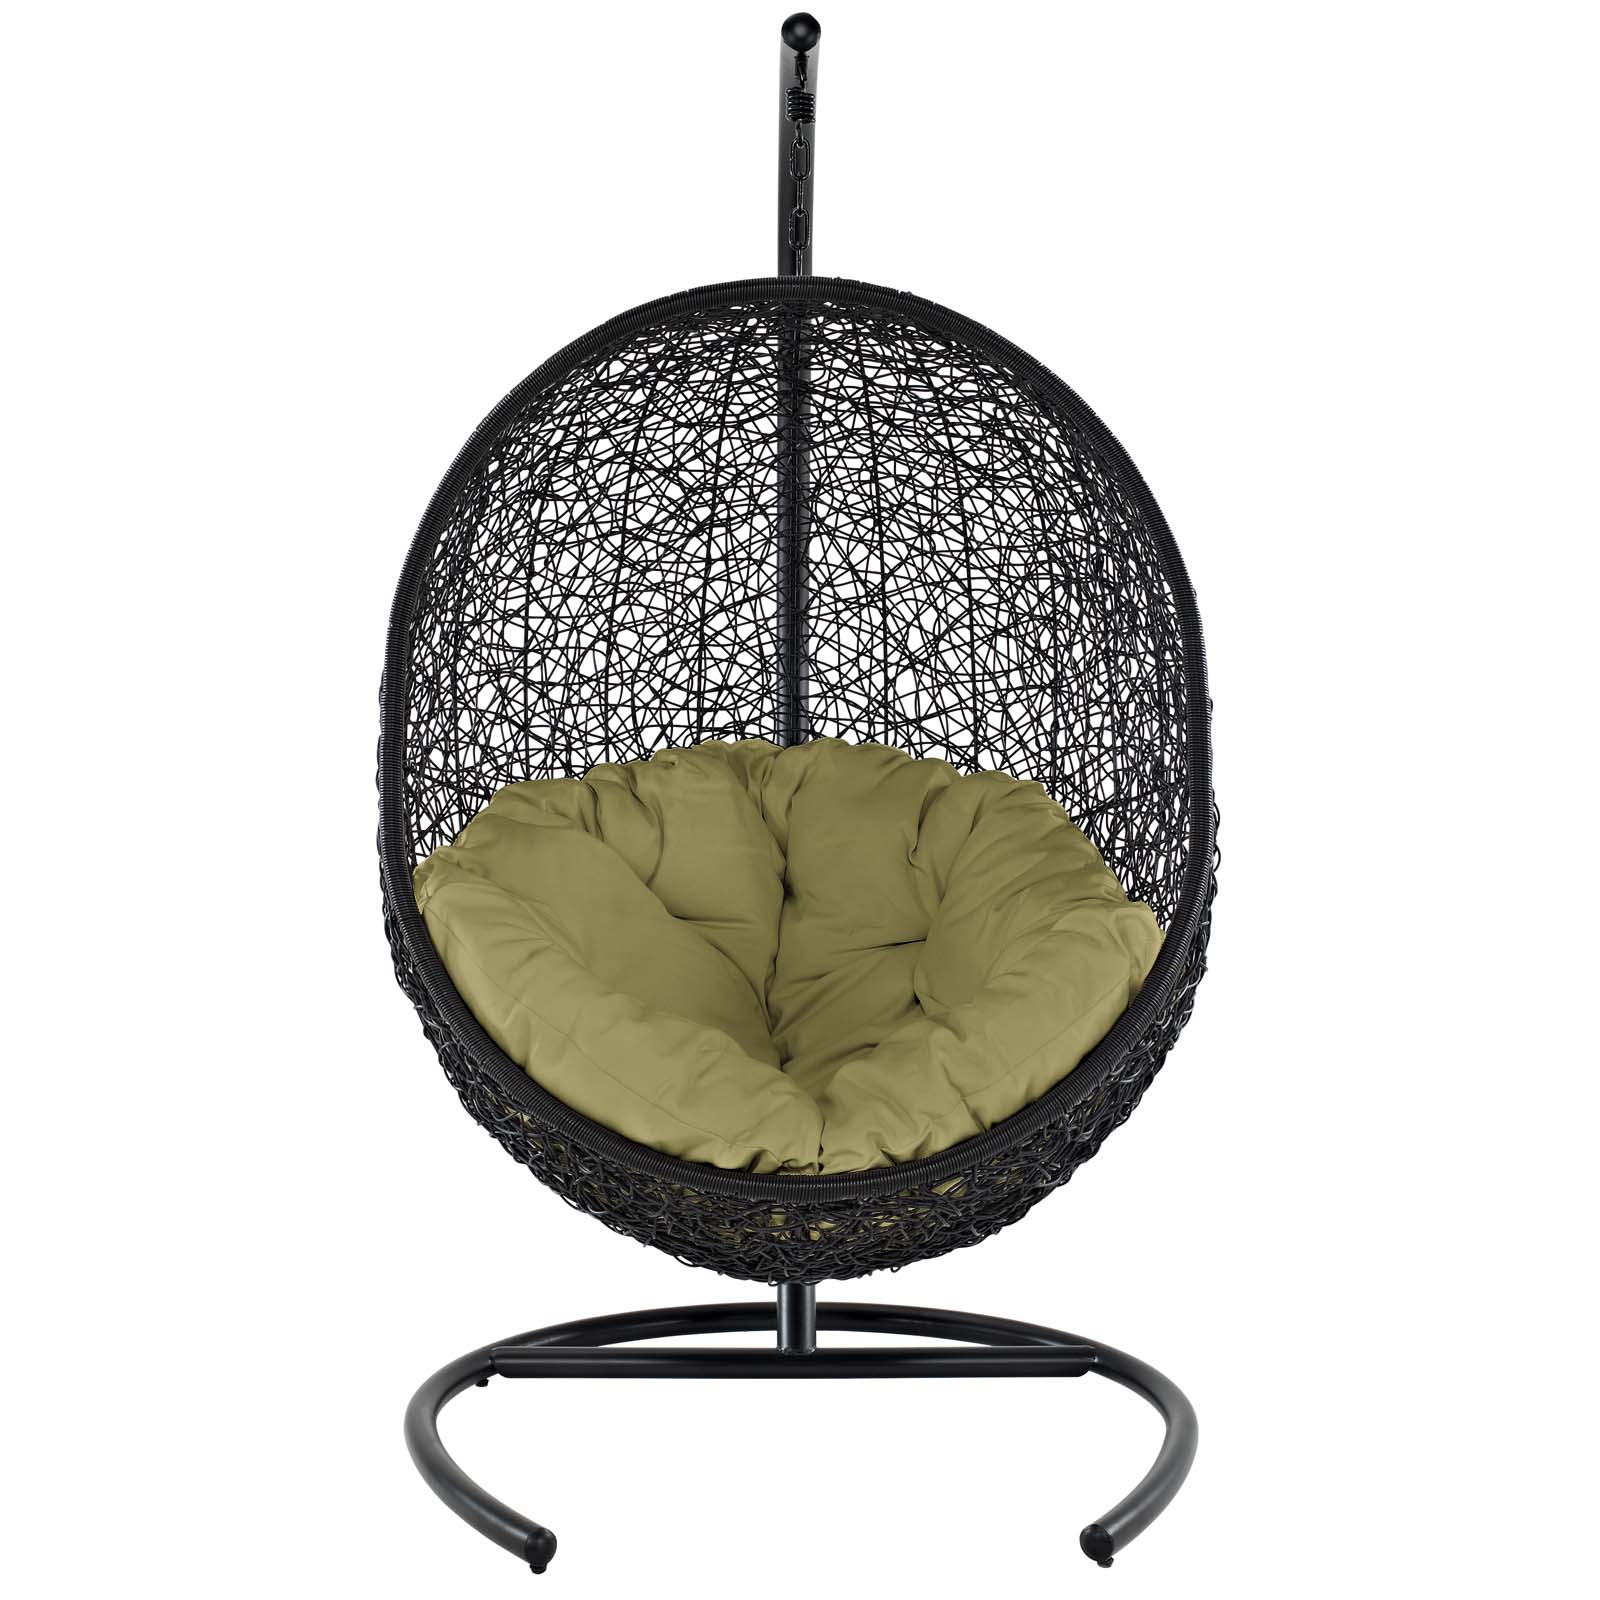 Modway Encase Swing Outdoor Patio Lounge Chair in Peridot - image 3 of 8